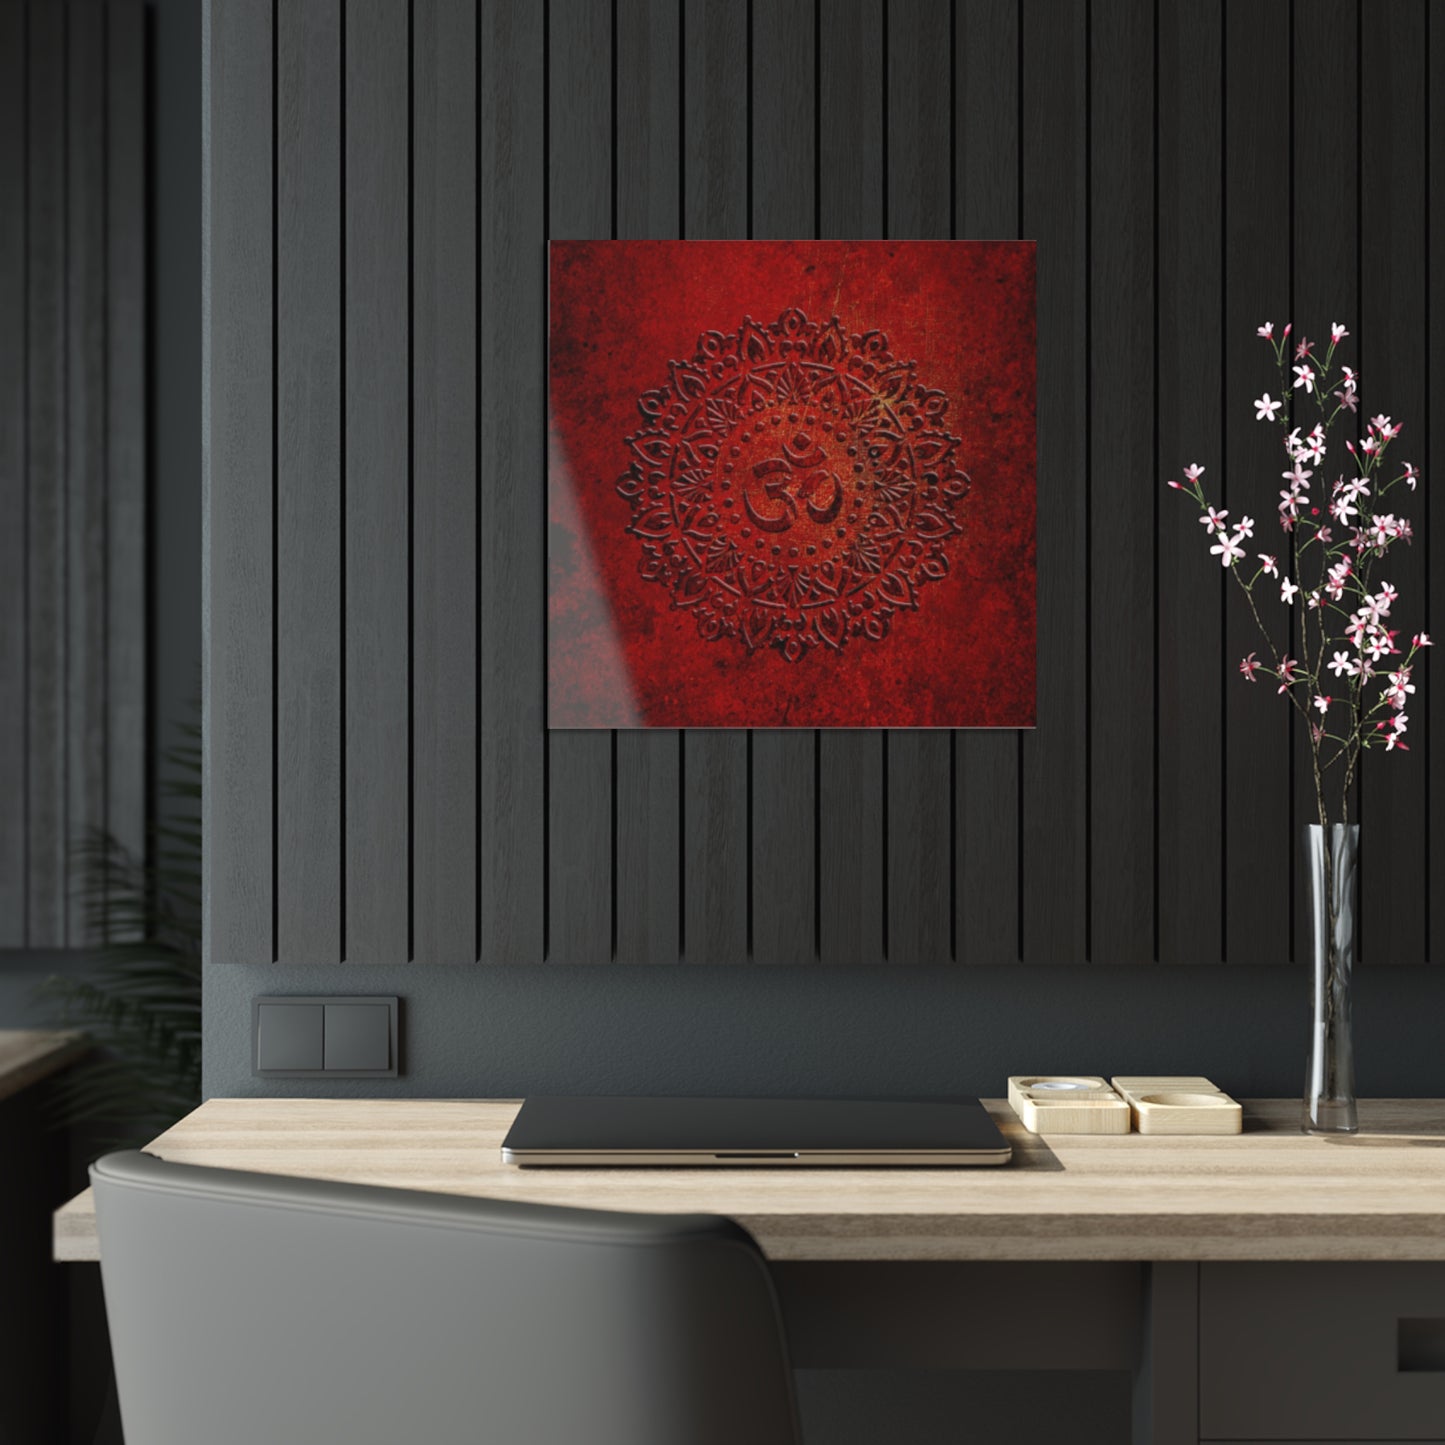 Om Symbol Mandala Style on Lava Red Background Printed on a Crystal Clear Acrylic Panel 20x20